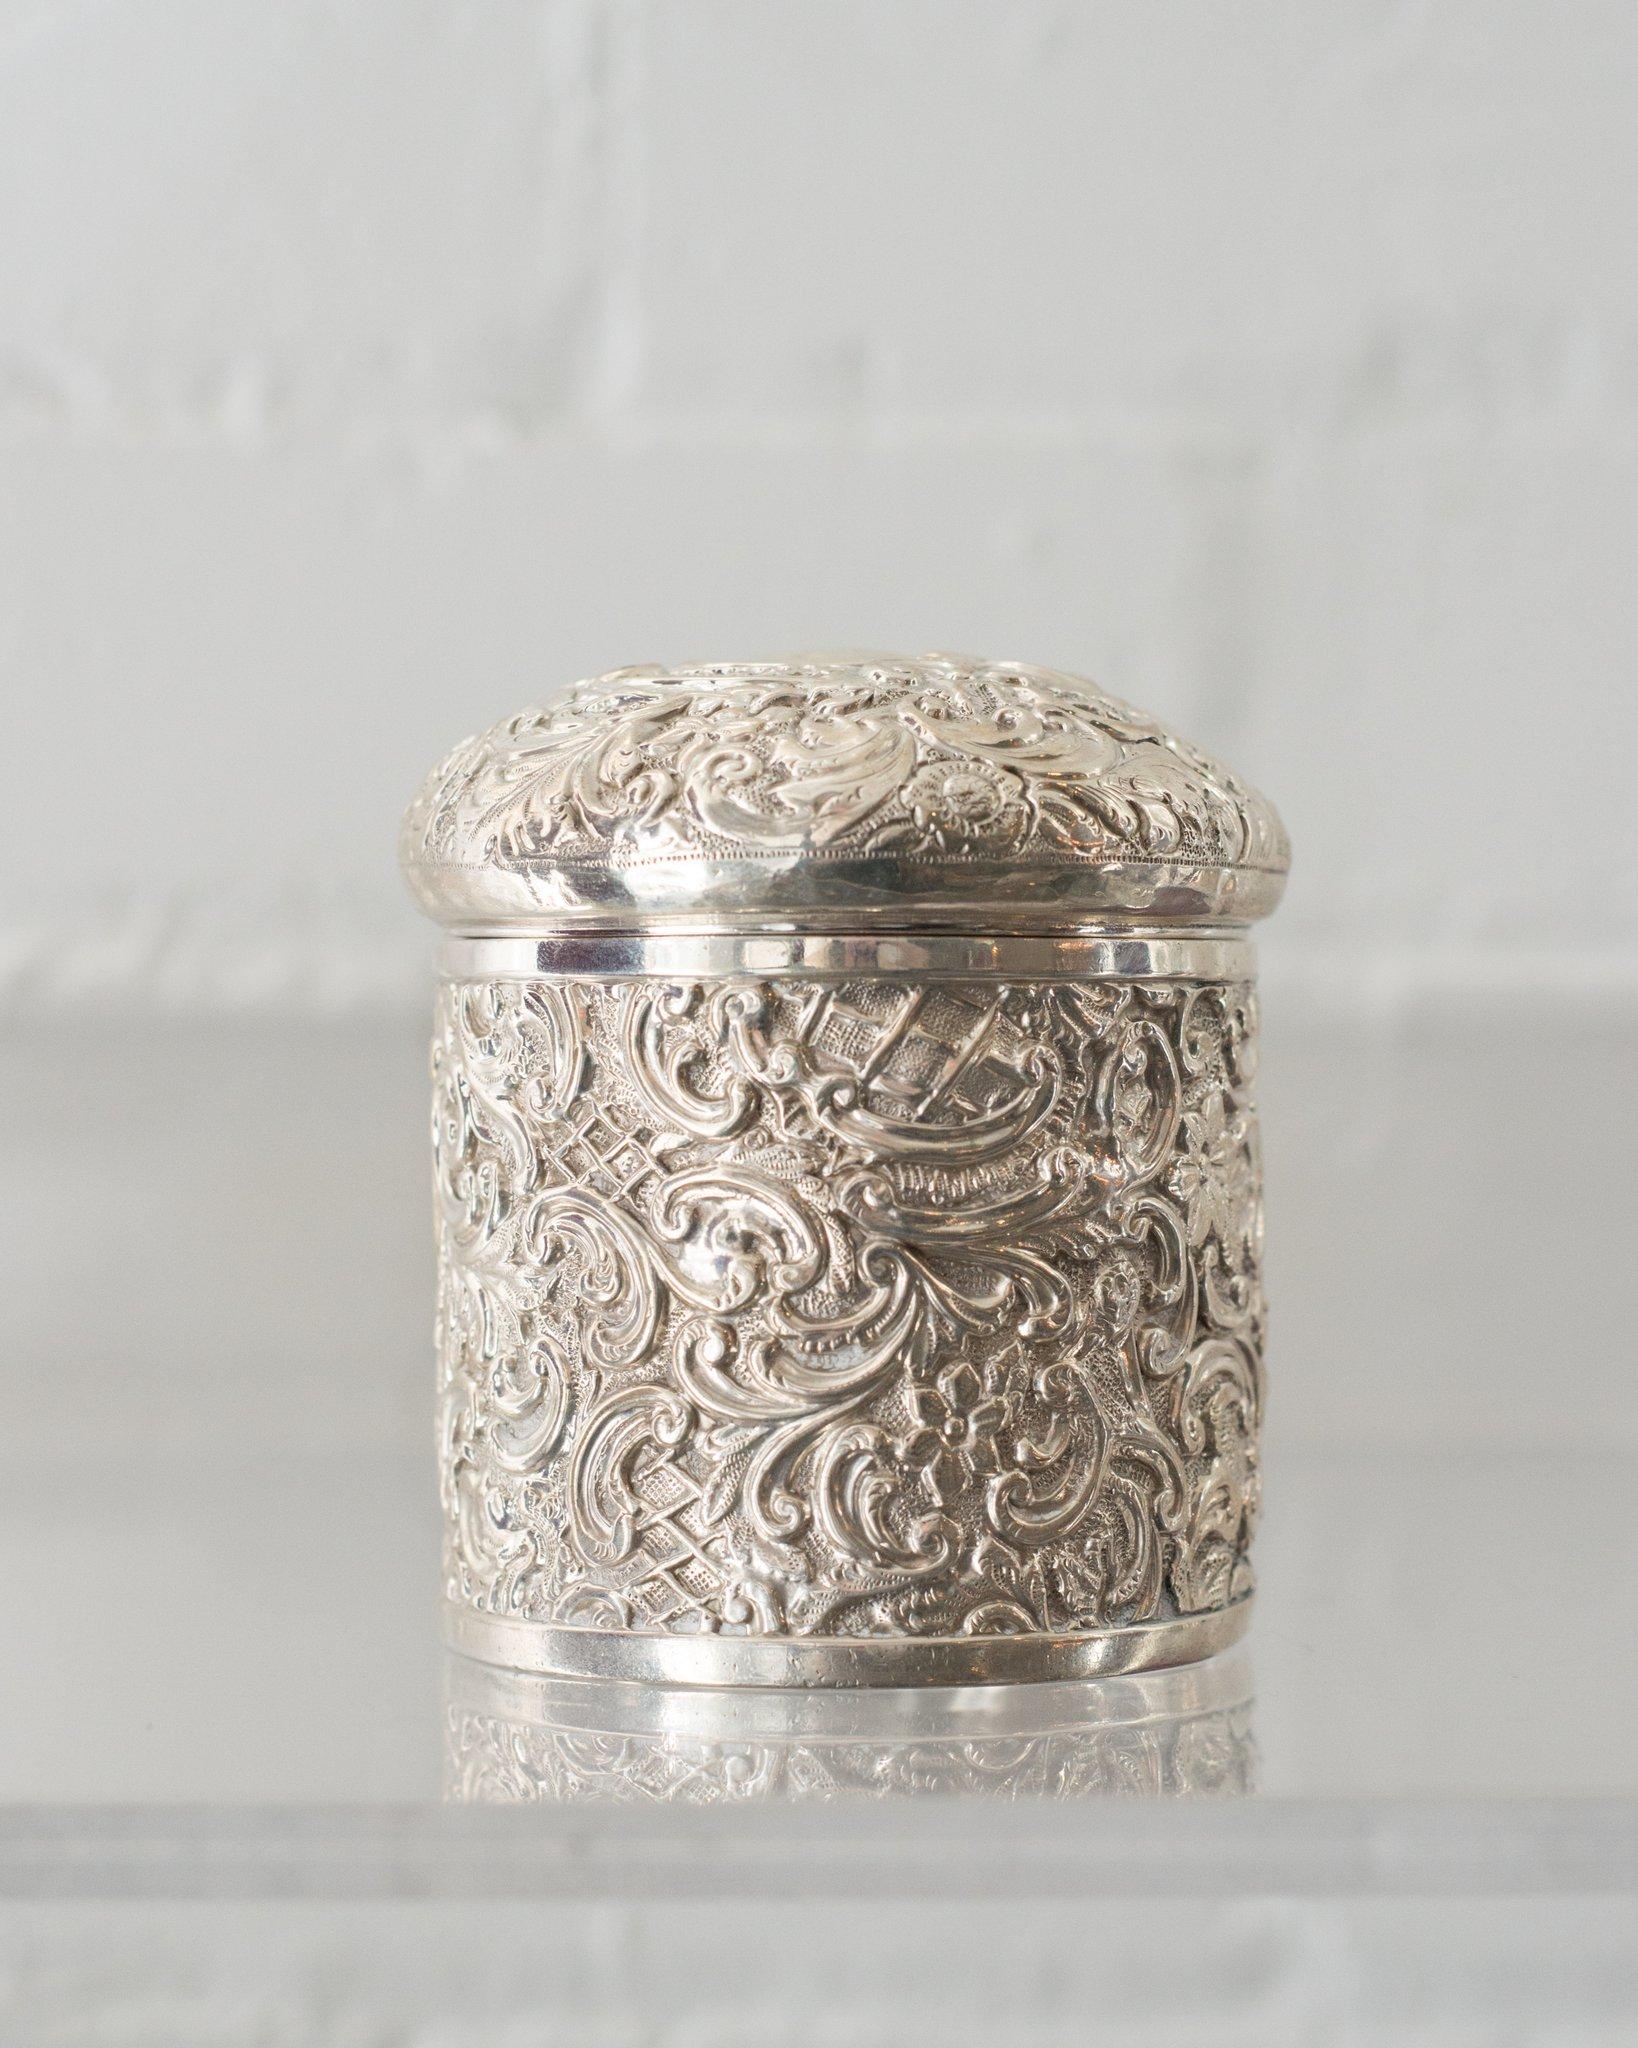 An ornate antique English chased sterling silver container with a lid. A collection of small silver items in a kitchen or bathroom will add a touch of elegance to a room.